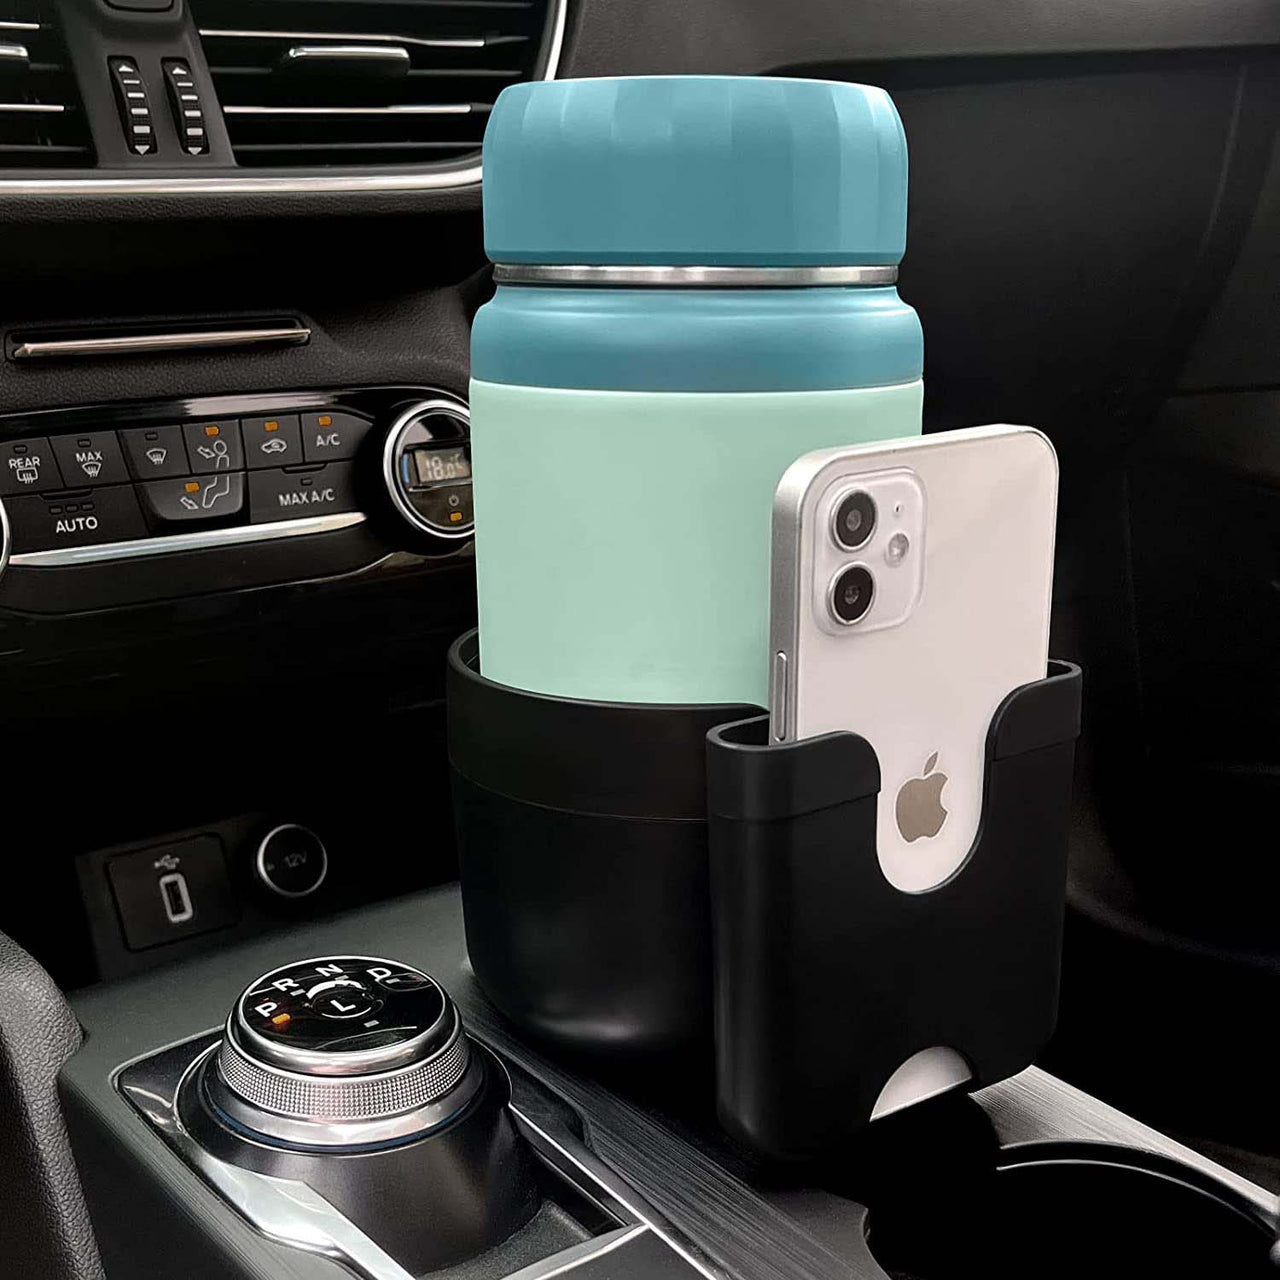 2-in-1 Car Cup Holder Expander Adapter with Adjustable Base, Custom Fit For Your Cars, Car Cup Holder Expander Organizer with Phone Holder, Fits 32/40 oz Drinks Bottles, Car Accessories SU15988